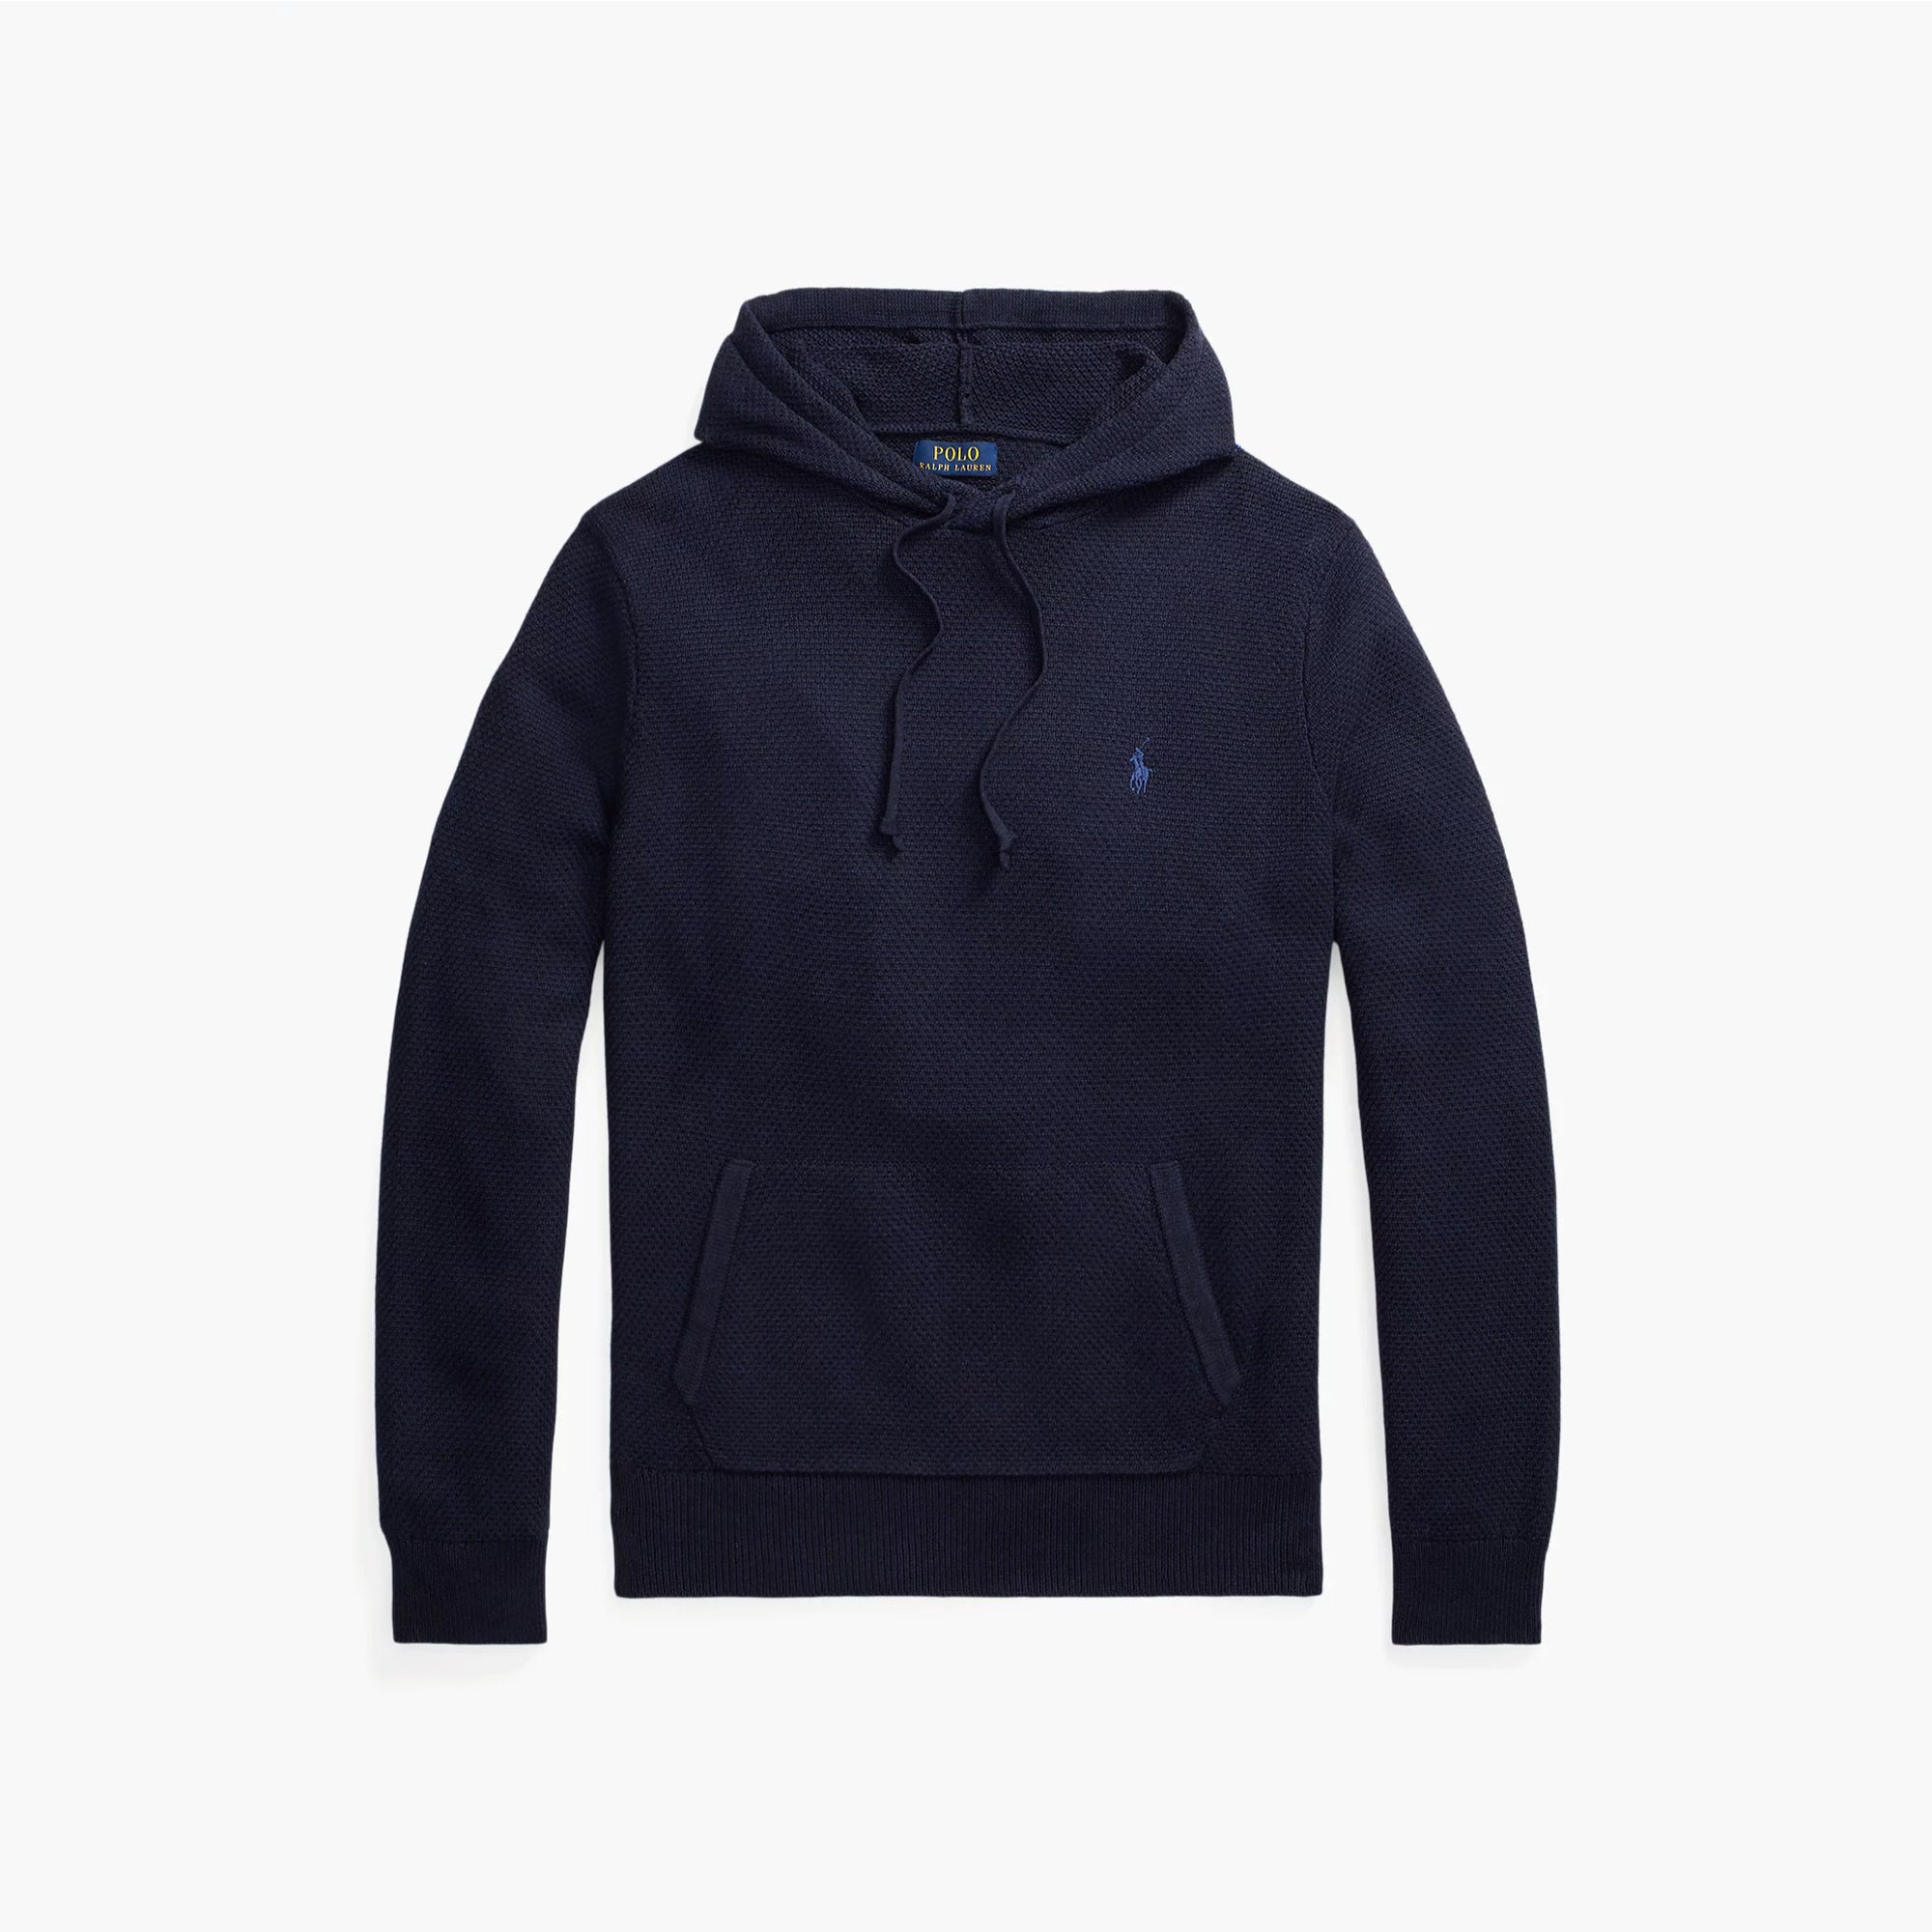 Woven-Stitch Cotton Hooded Sweater Navy Hthr